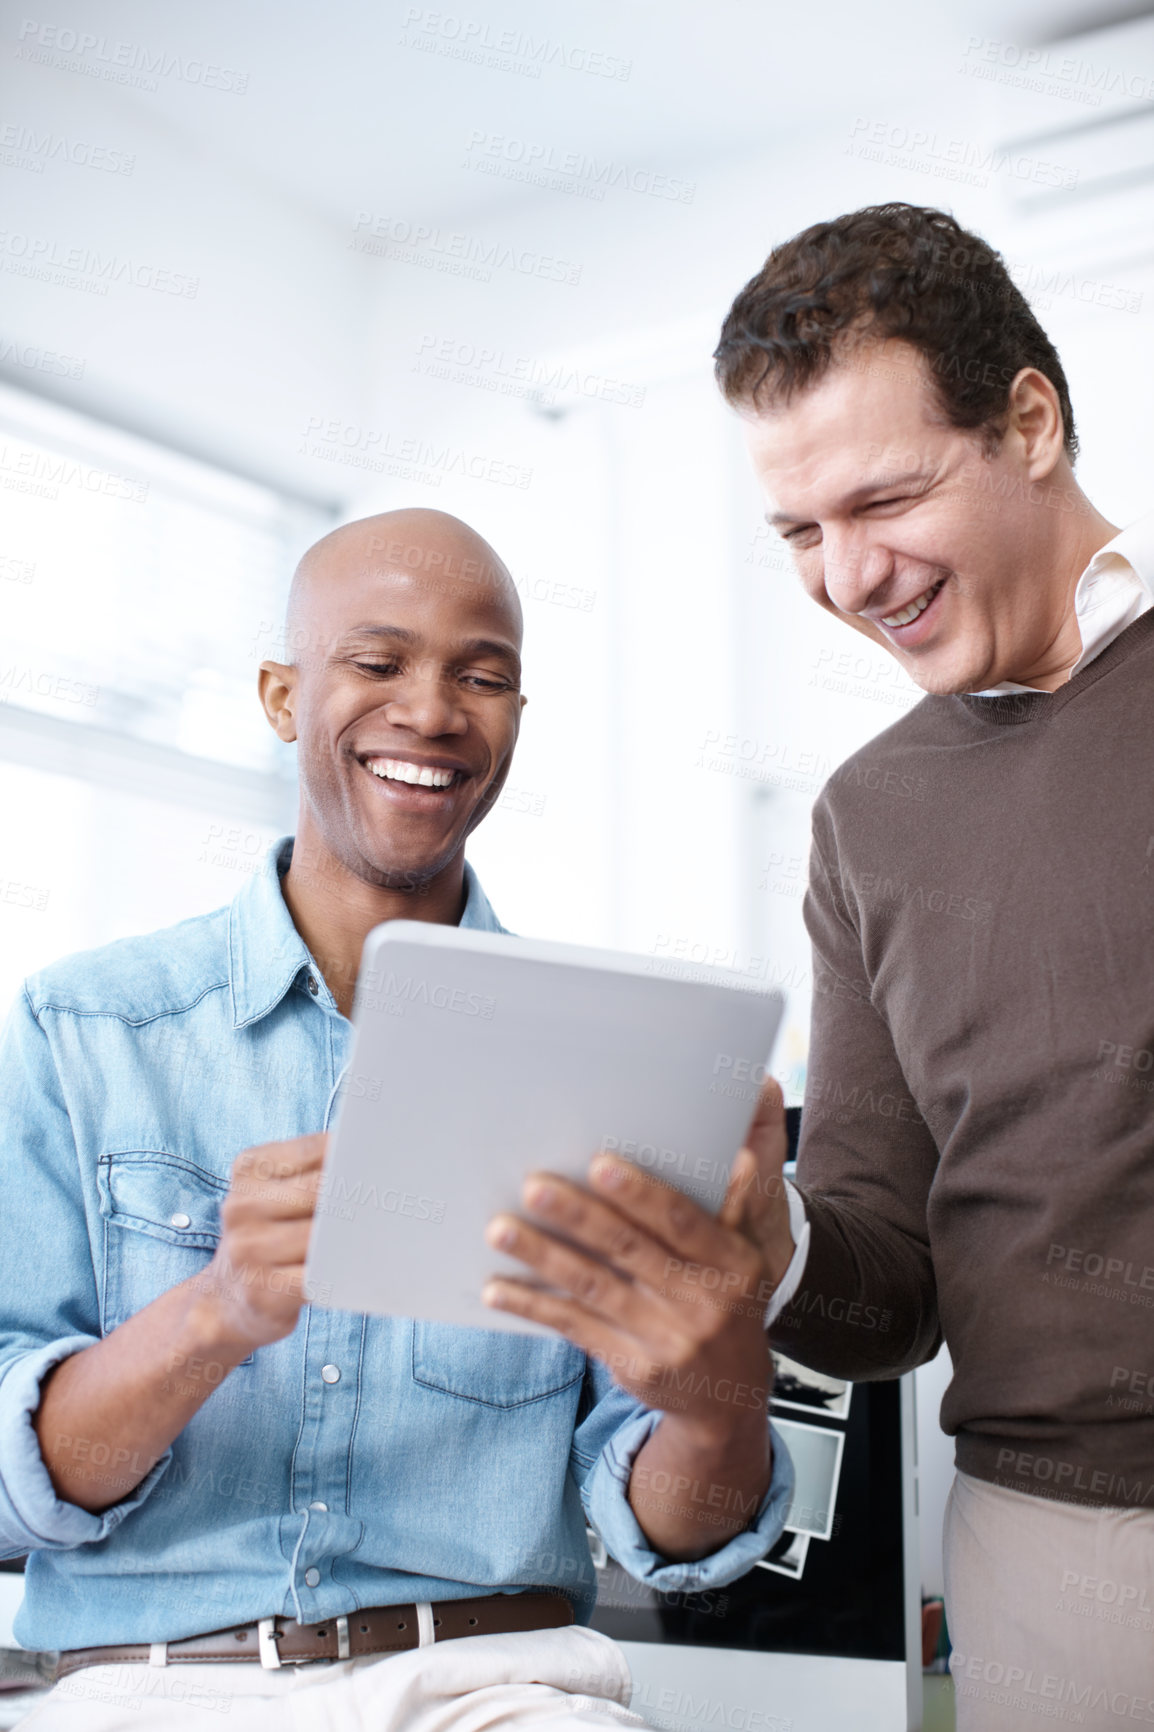 Buy stock photo Two businessmen using a digital tablet in the office